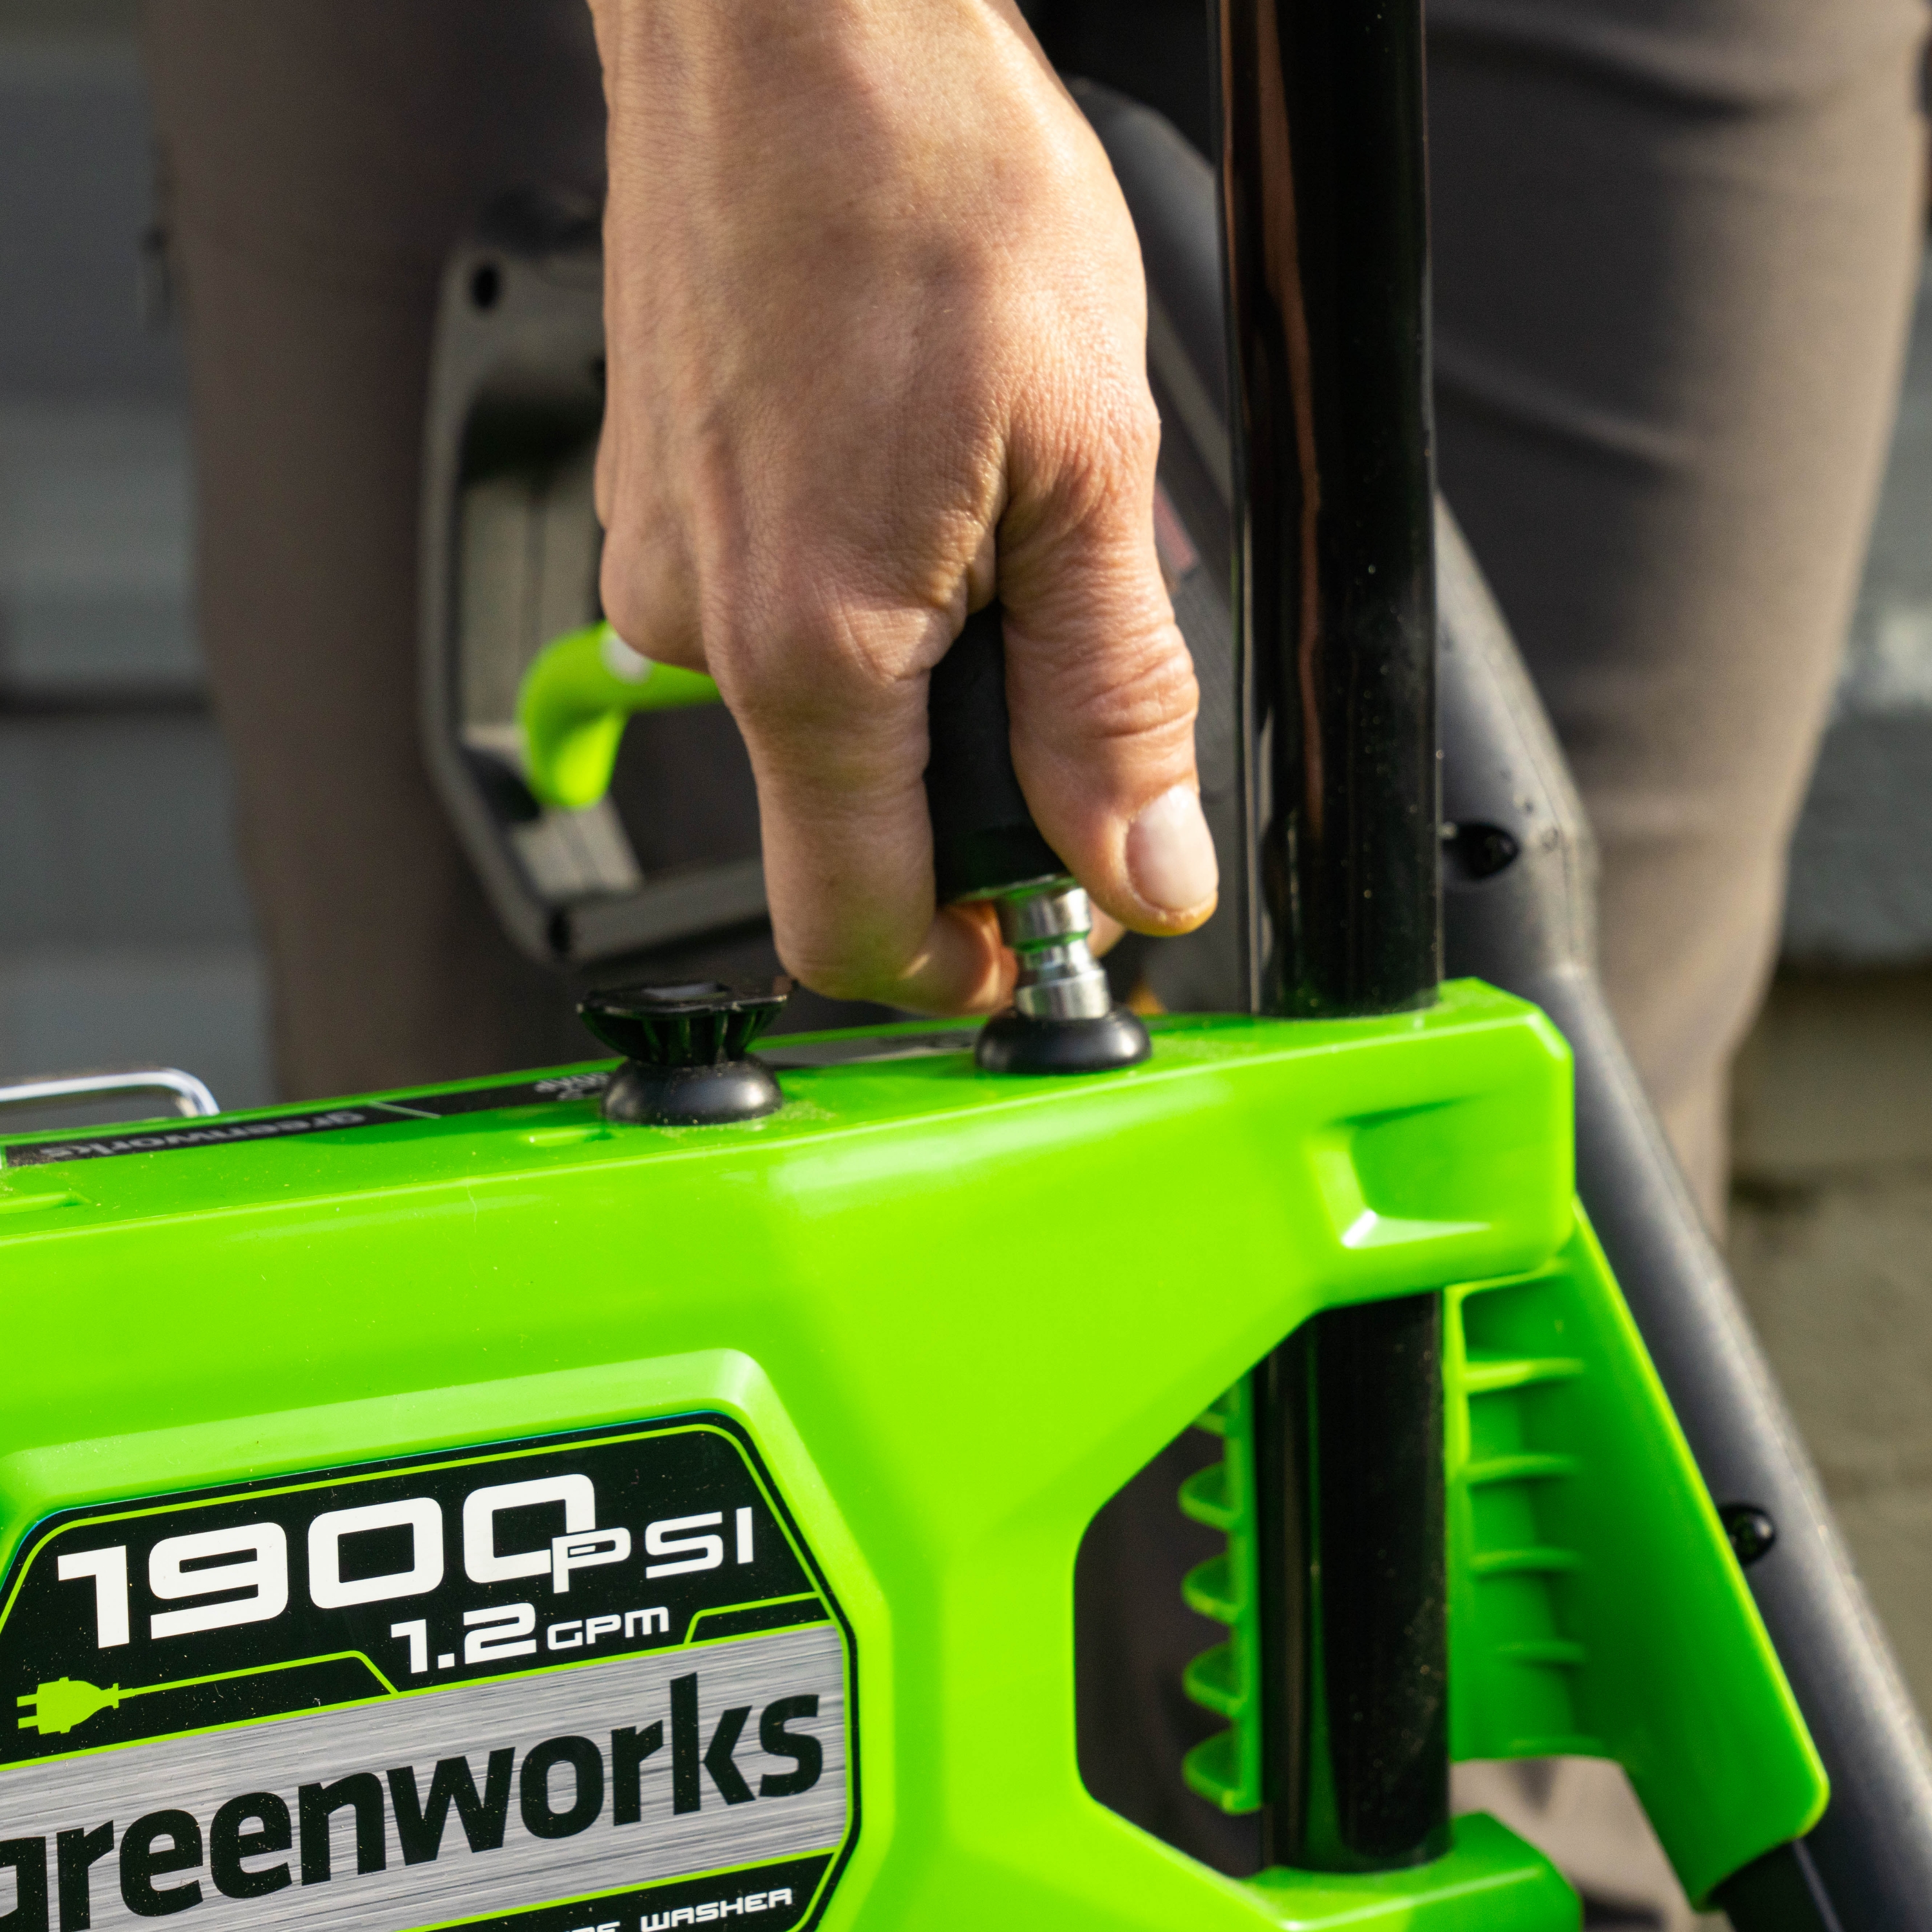 Greenworks Electric Pressure Washer up to 1900 PSI at 1.2 GPM